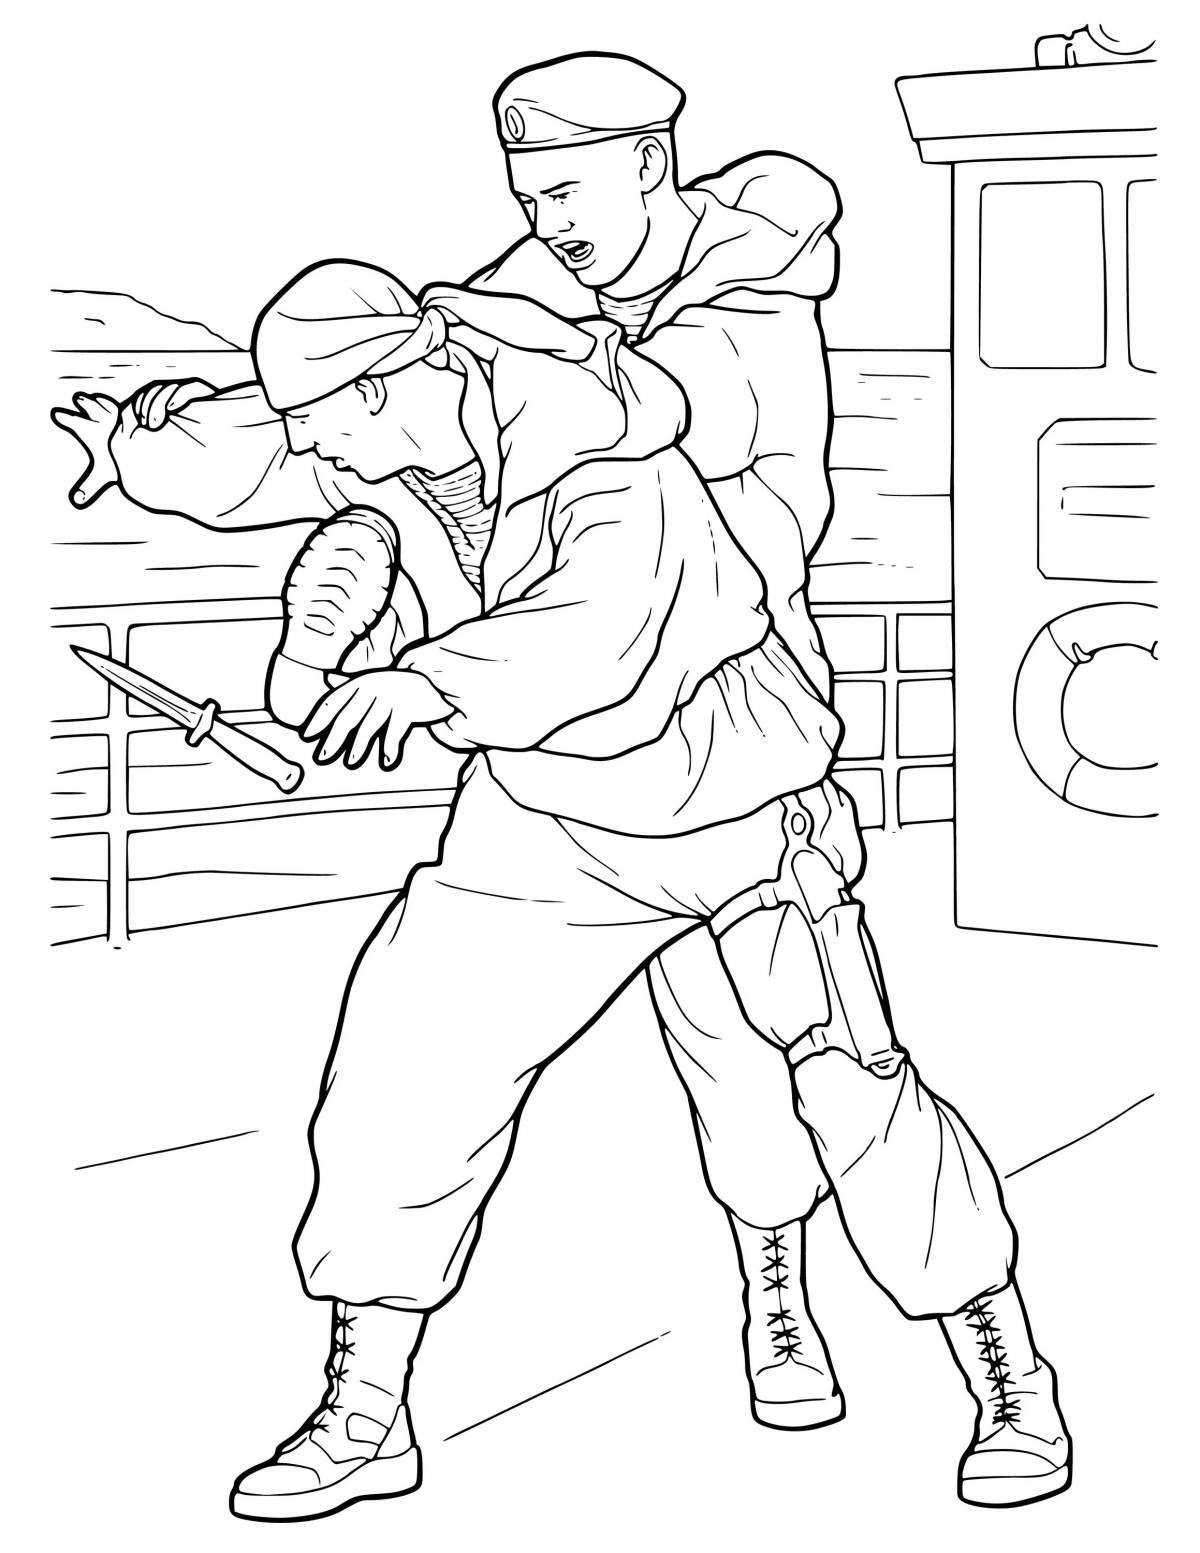 Colourful army soldier coloring page